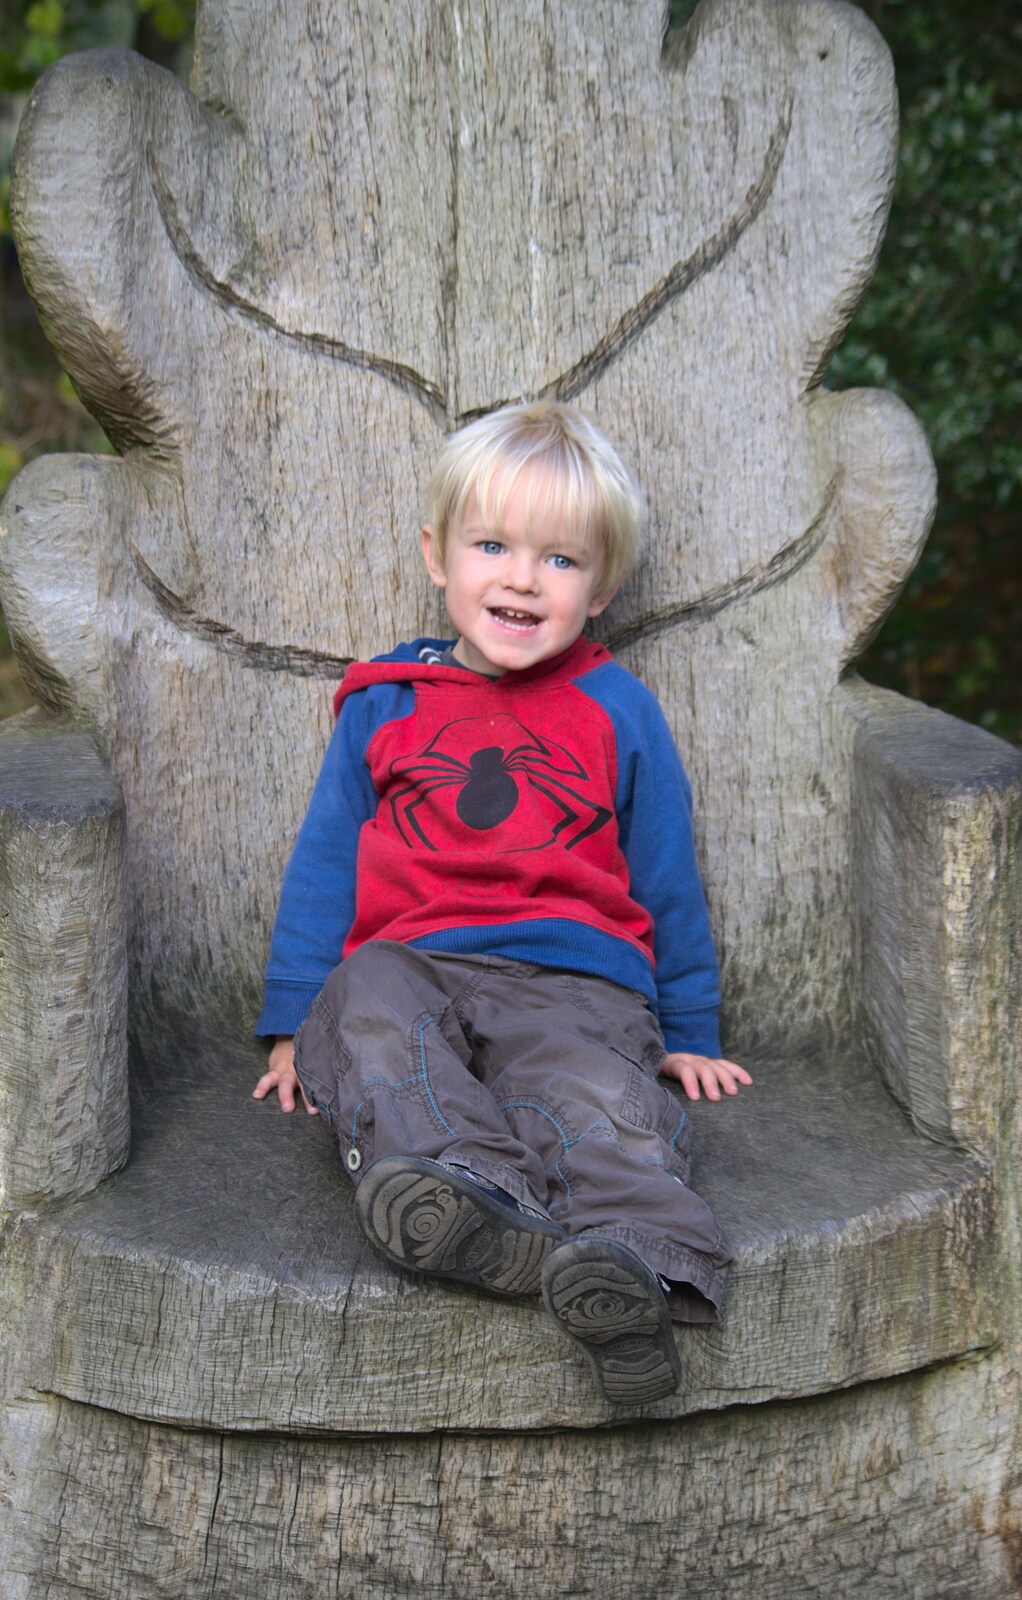 Harry sits in the wooden throne from Another Walk around Thornham Estate, Suffolk - 27th October 2014